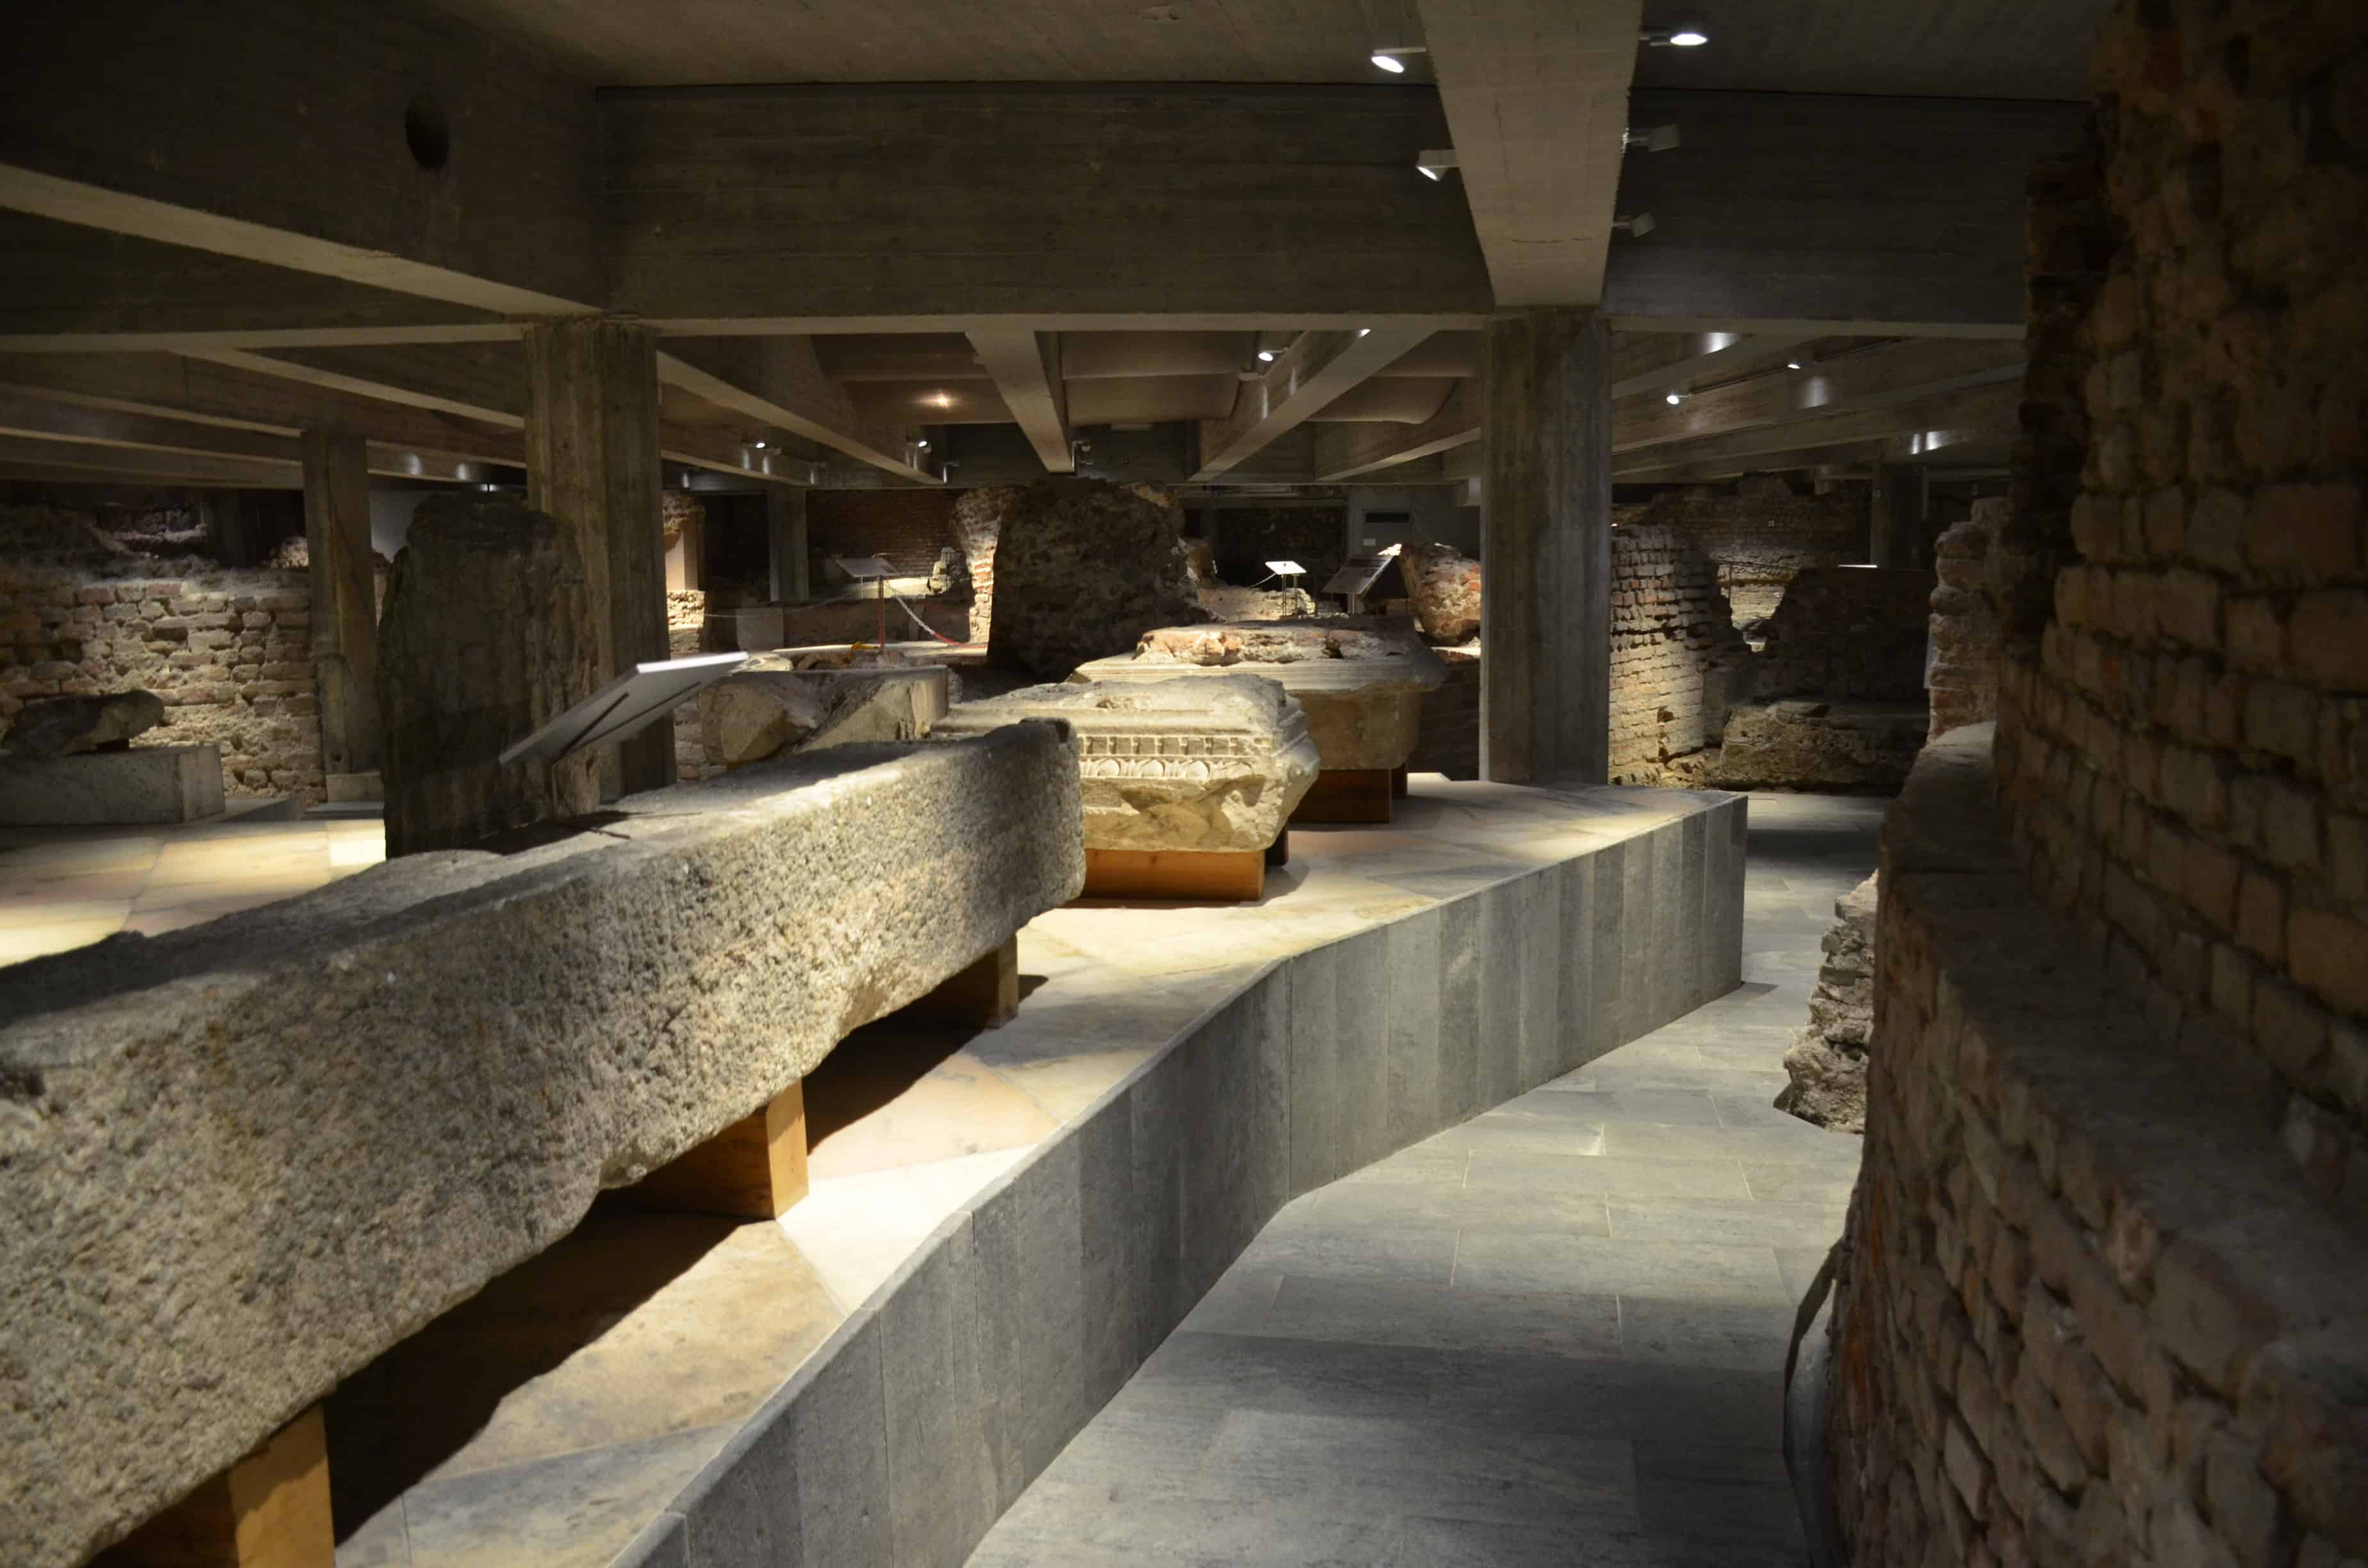 Archaeological area at the Duomo in Milan, Italy